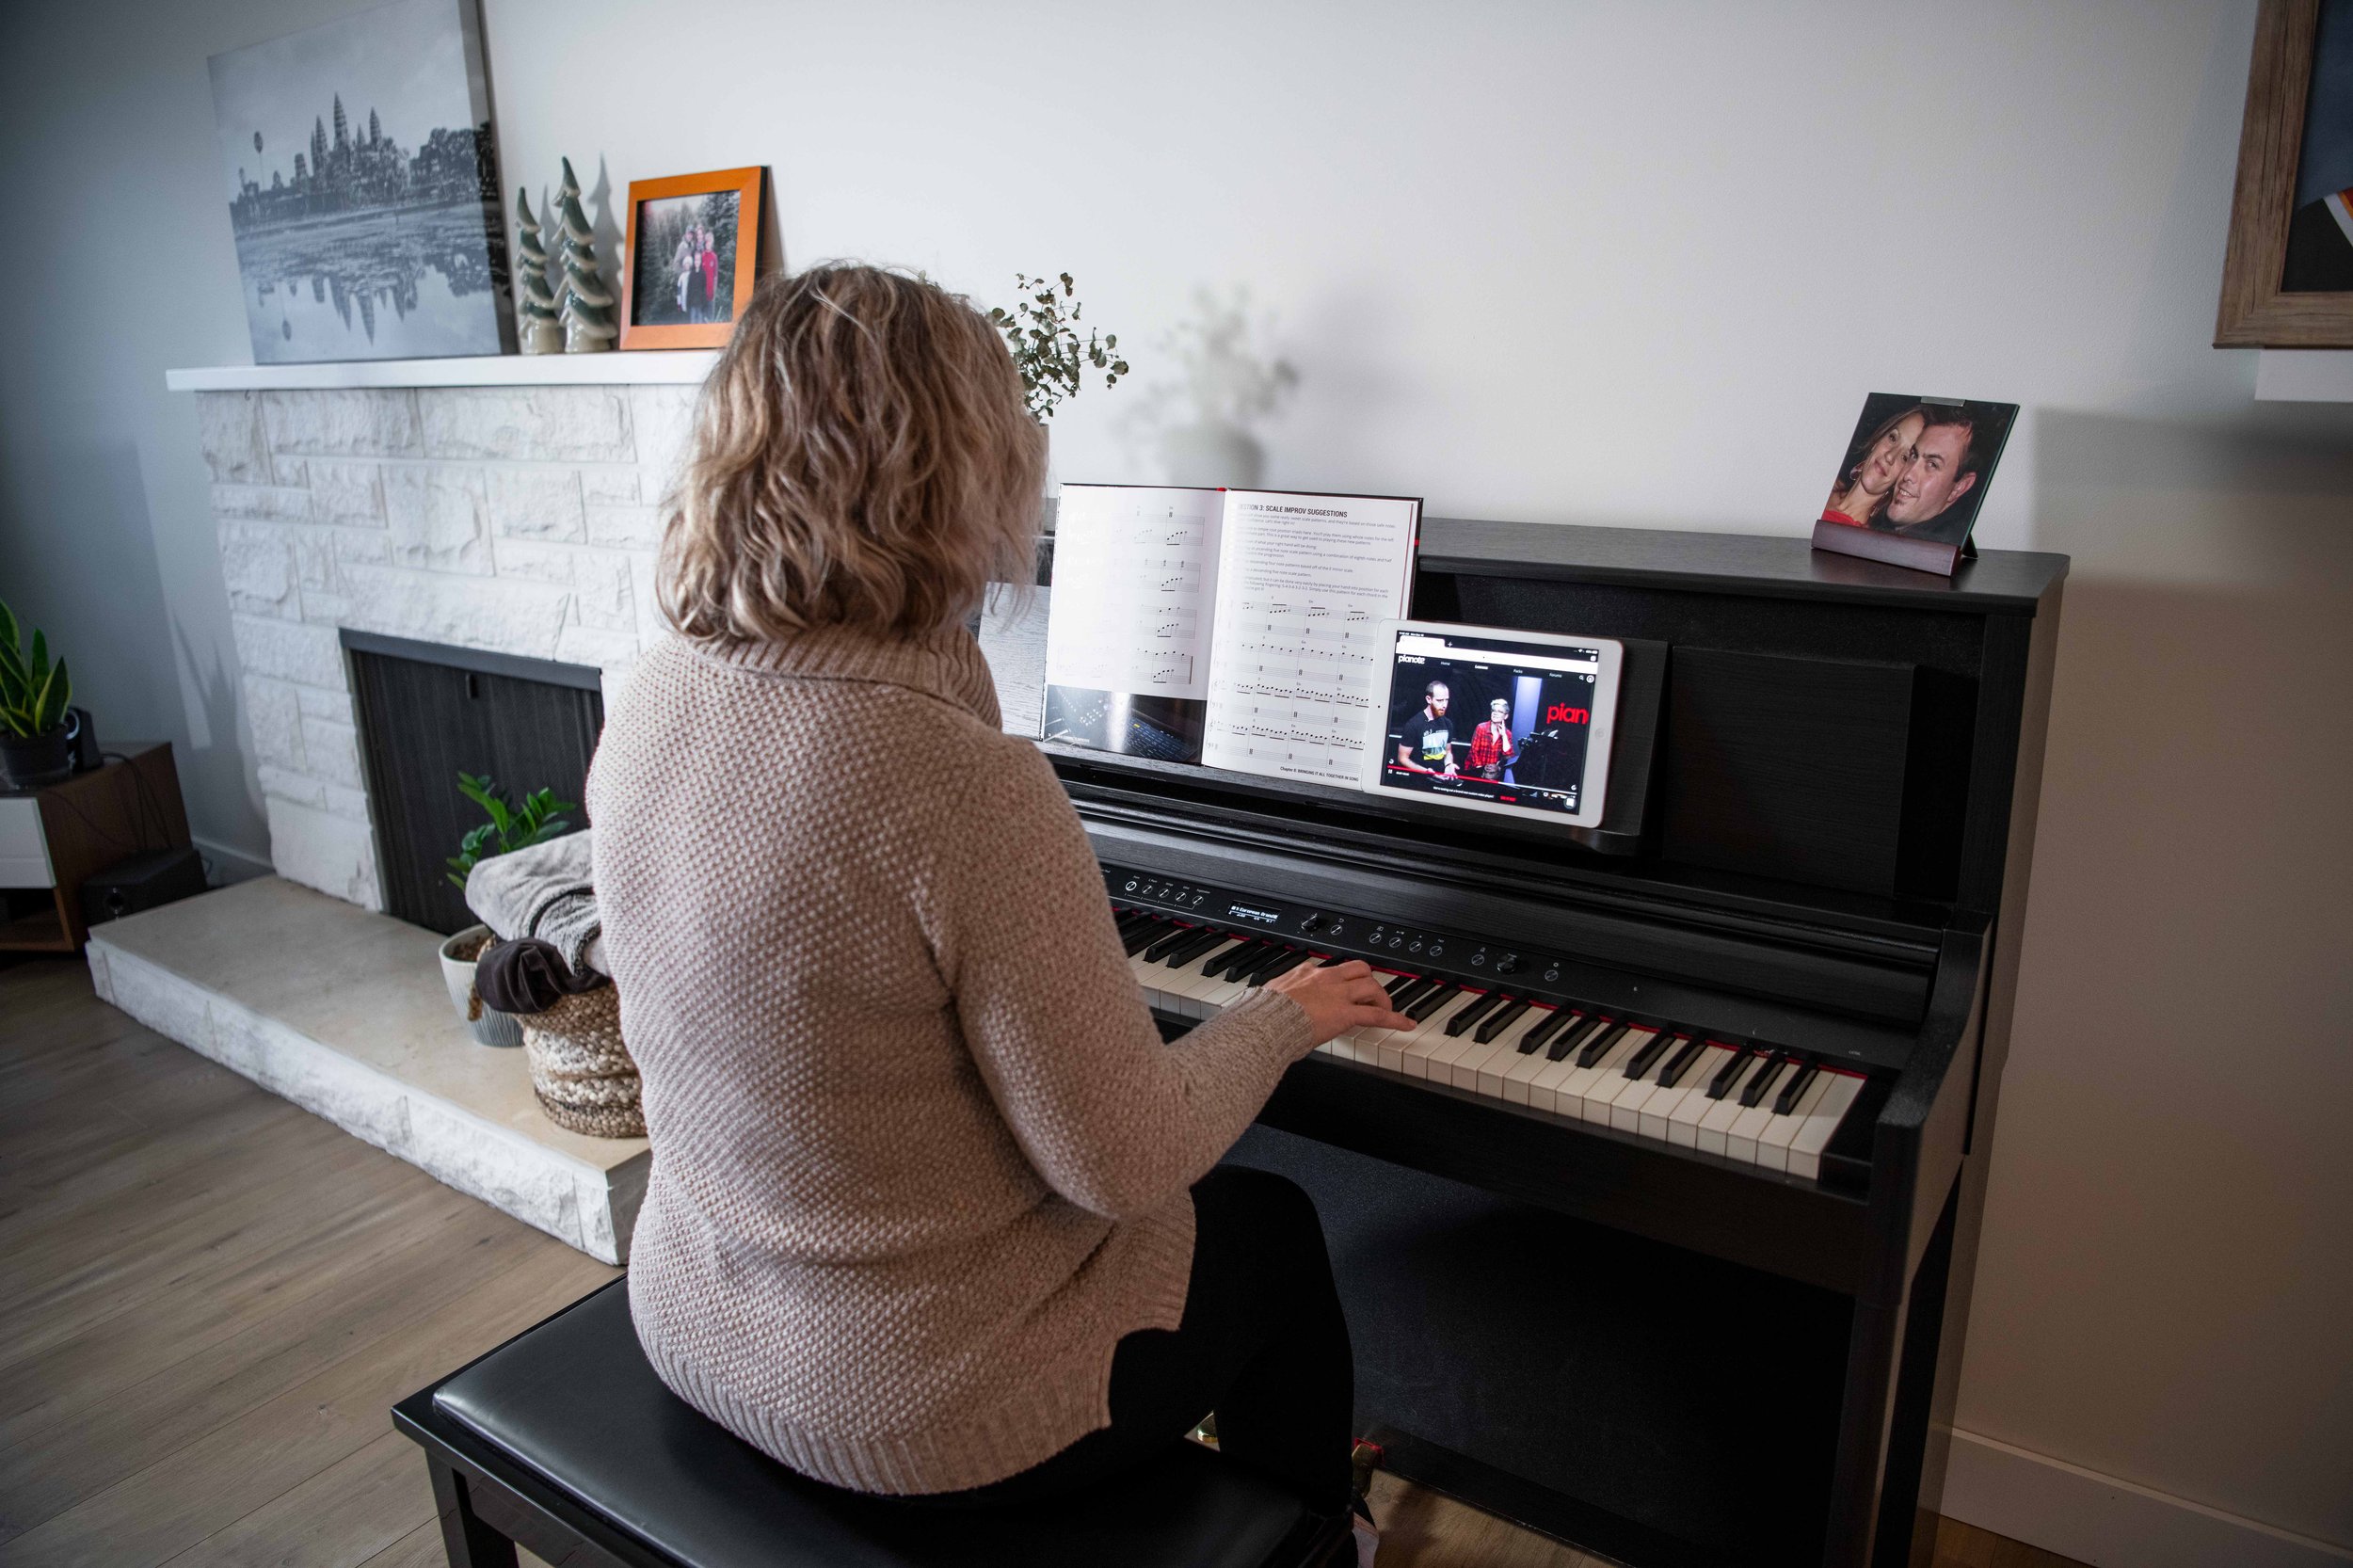 Woman playing console keyboard (upright piano) at home with book and iPad.